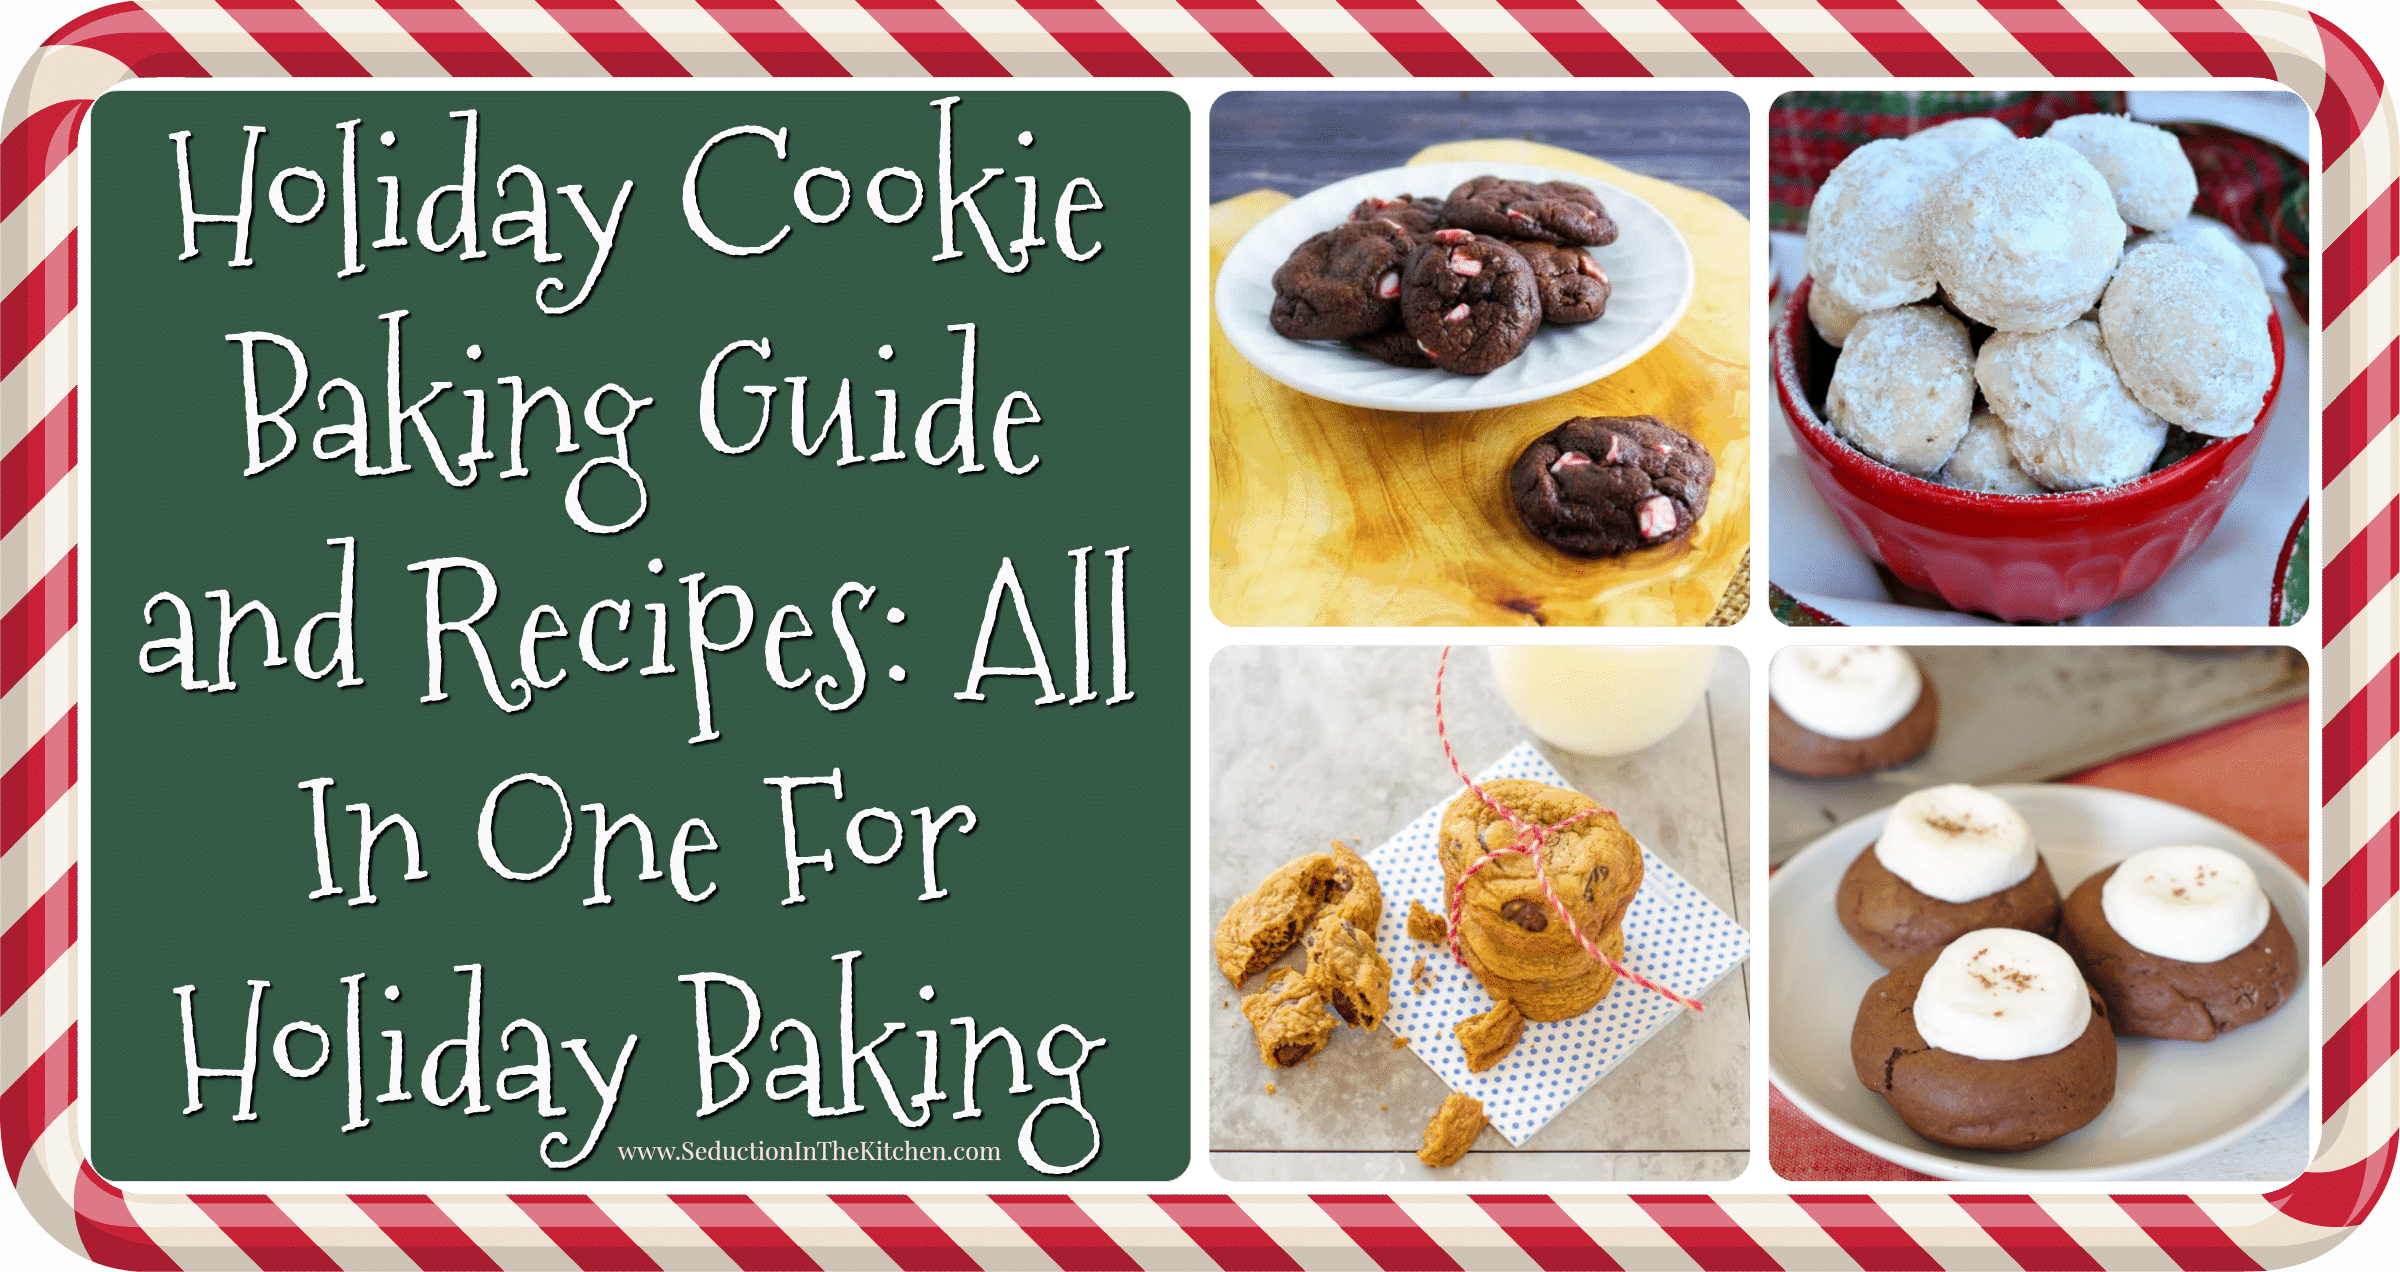 Holiday Cookie Baking Guide and Recipes All In One For Holiday Baking title